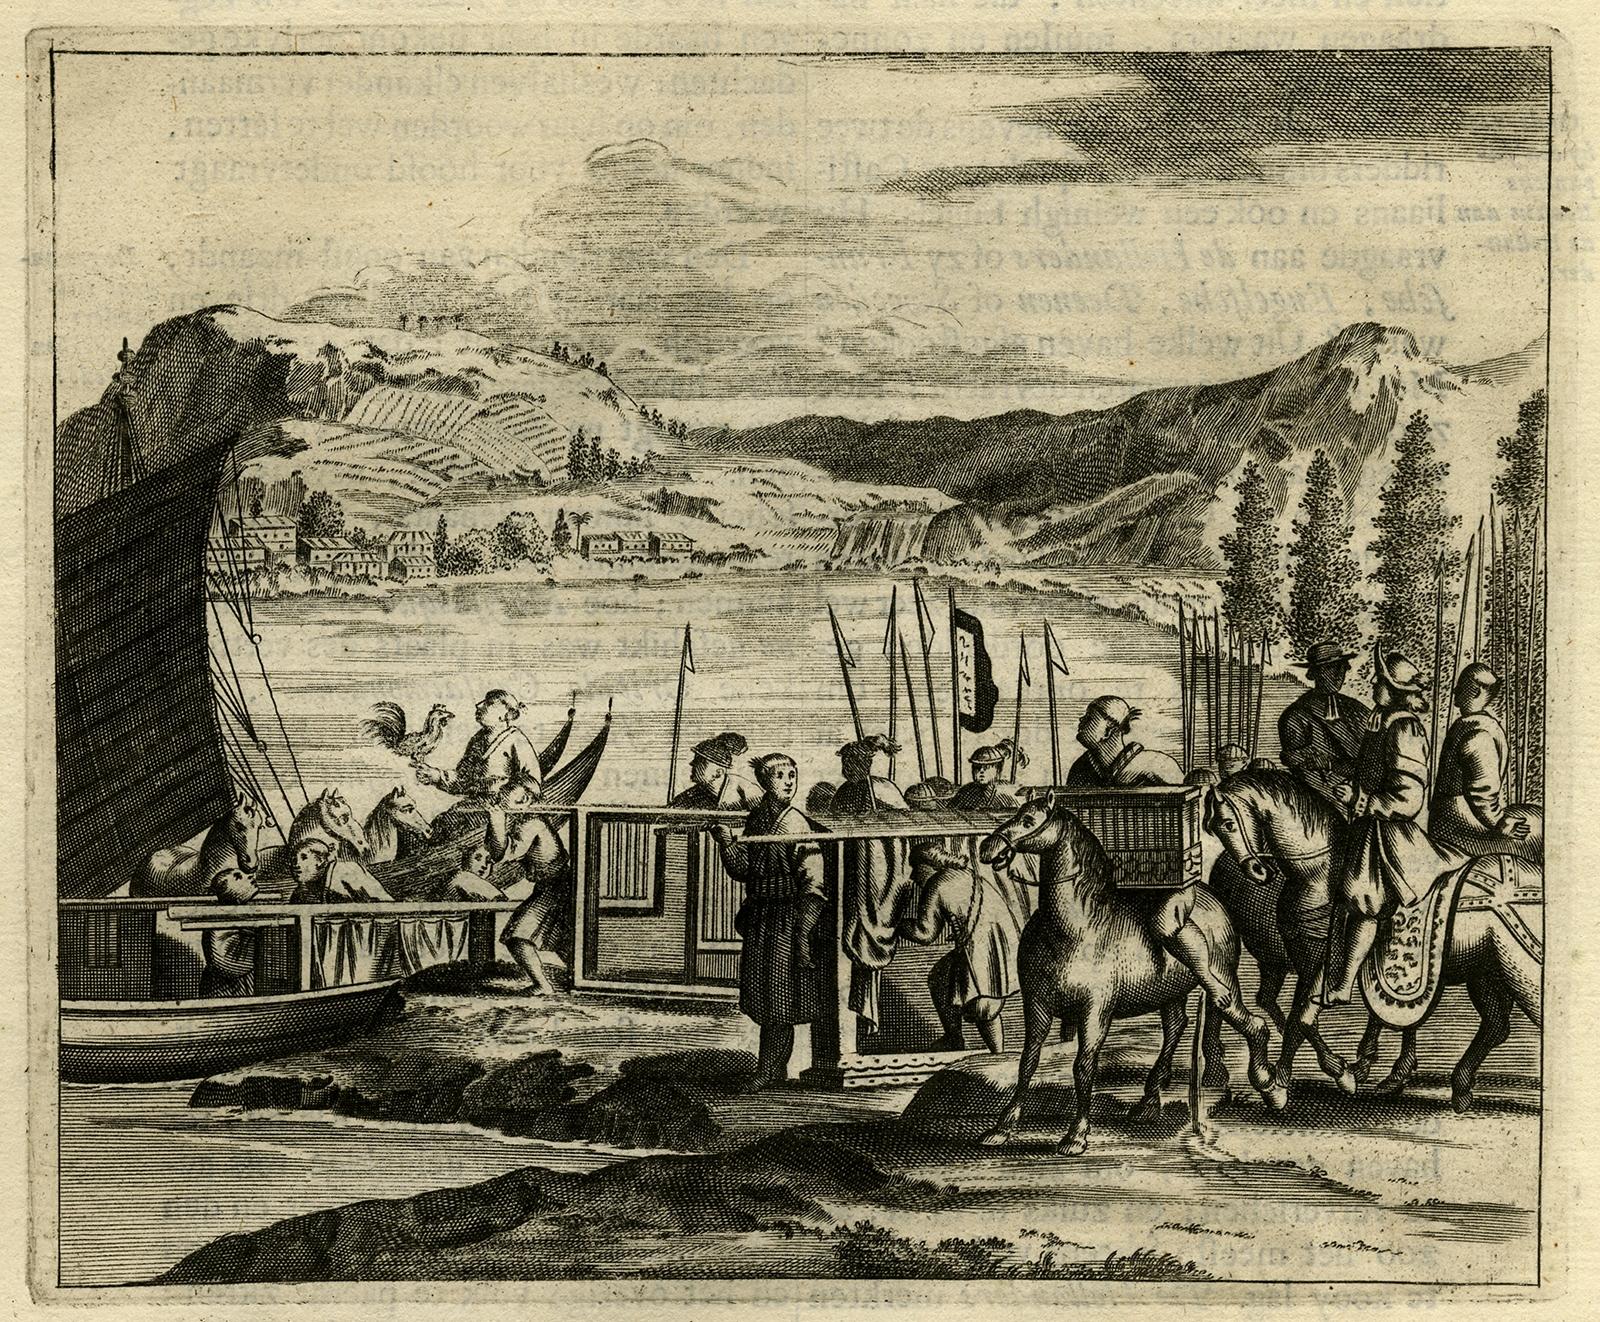 Antique print titled 'Japansche haanen wonderlyk vervoert.' 

This print shows the transportation of Japanese roosters. Several Japanese horsemen arrive at a boat moored at the edge of a river. The text explains the Japanese carried roosters on